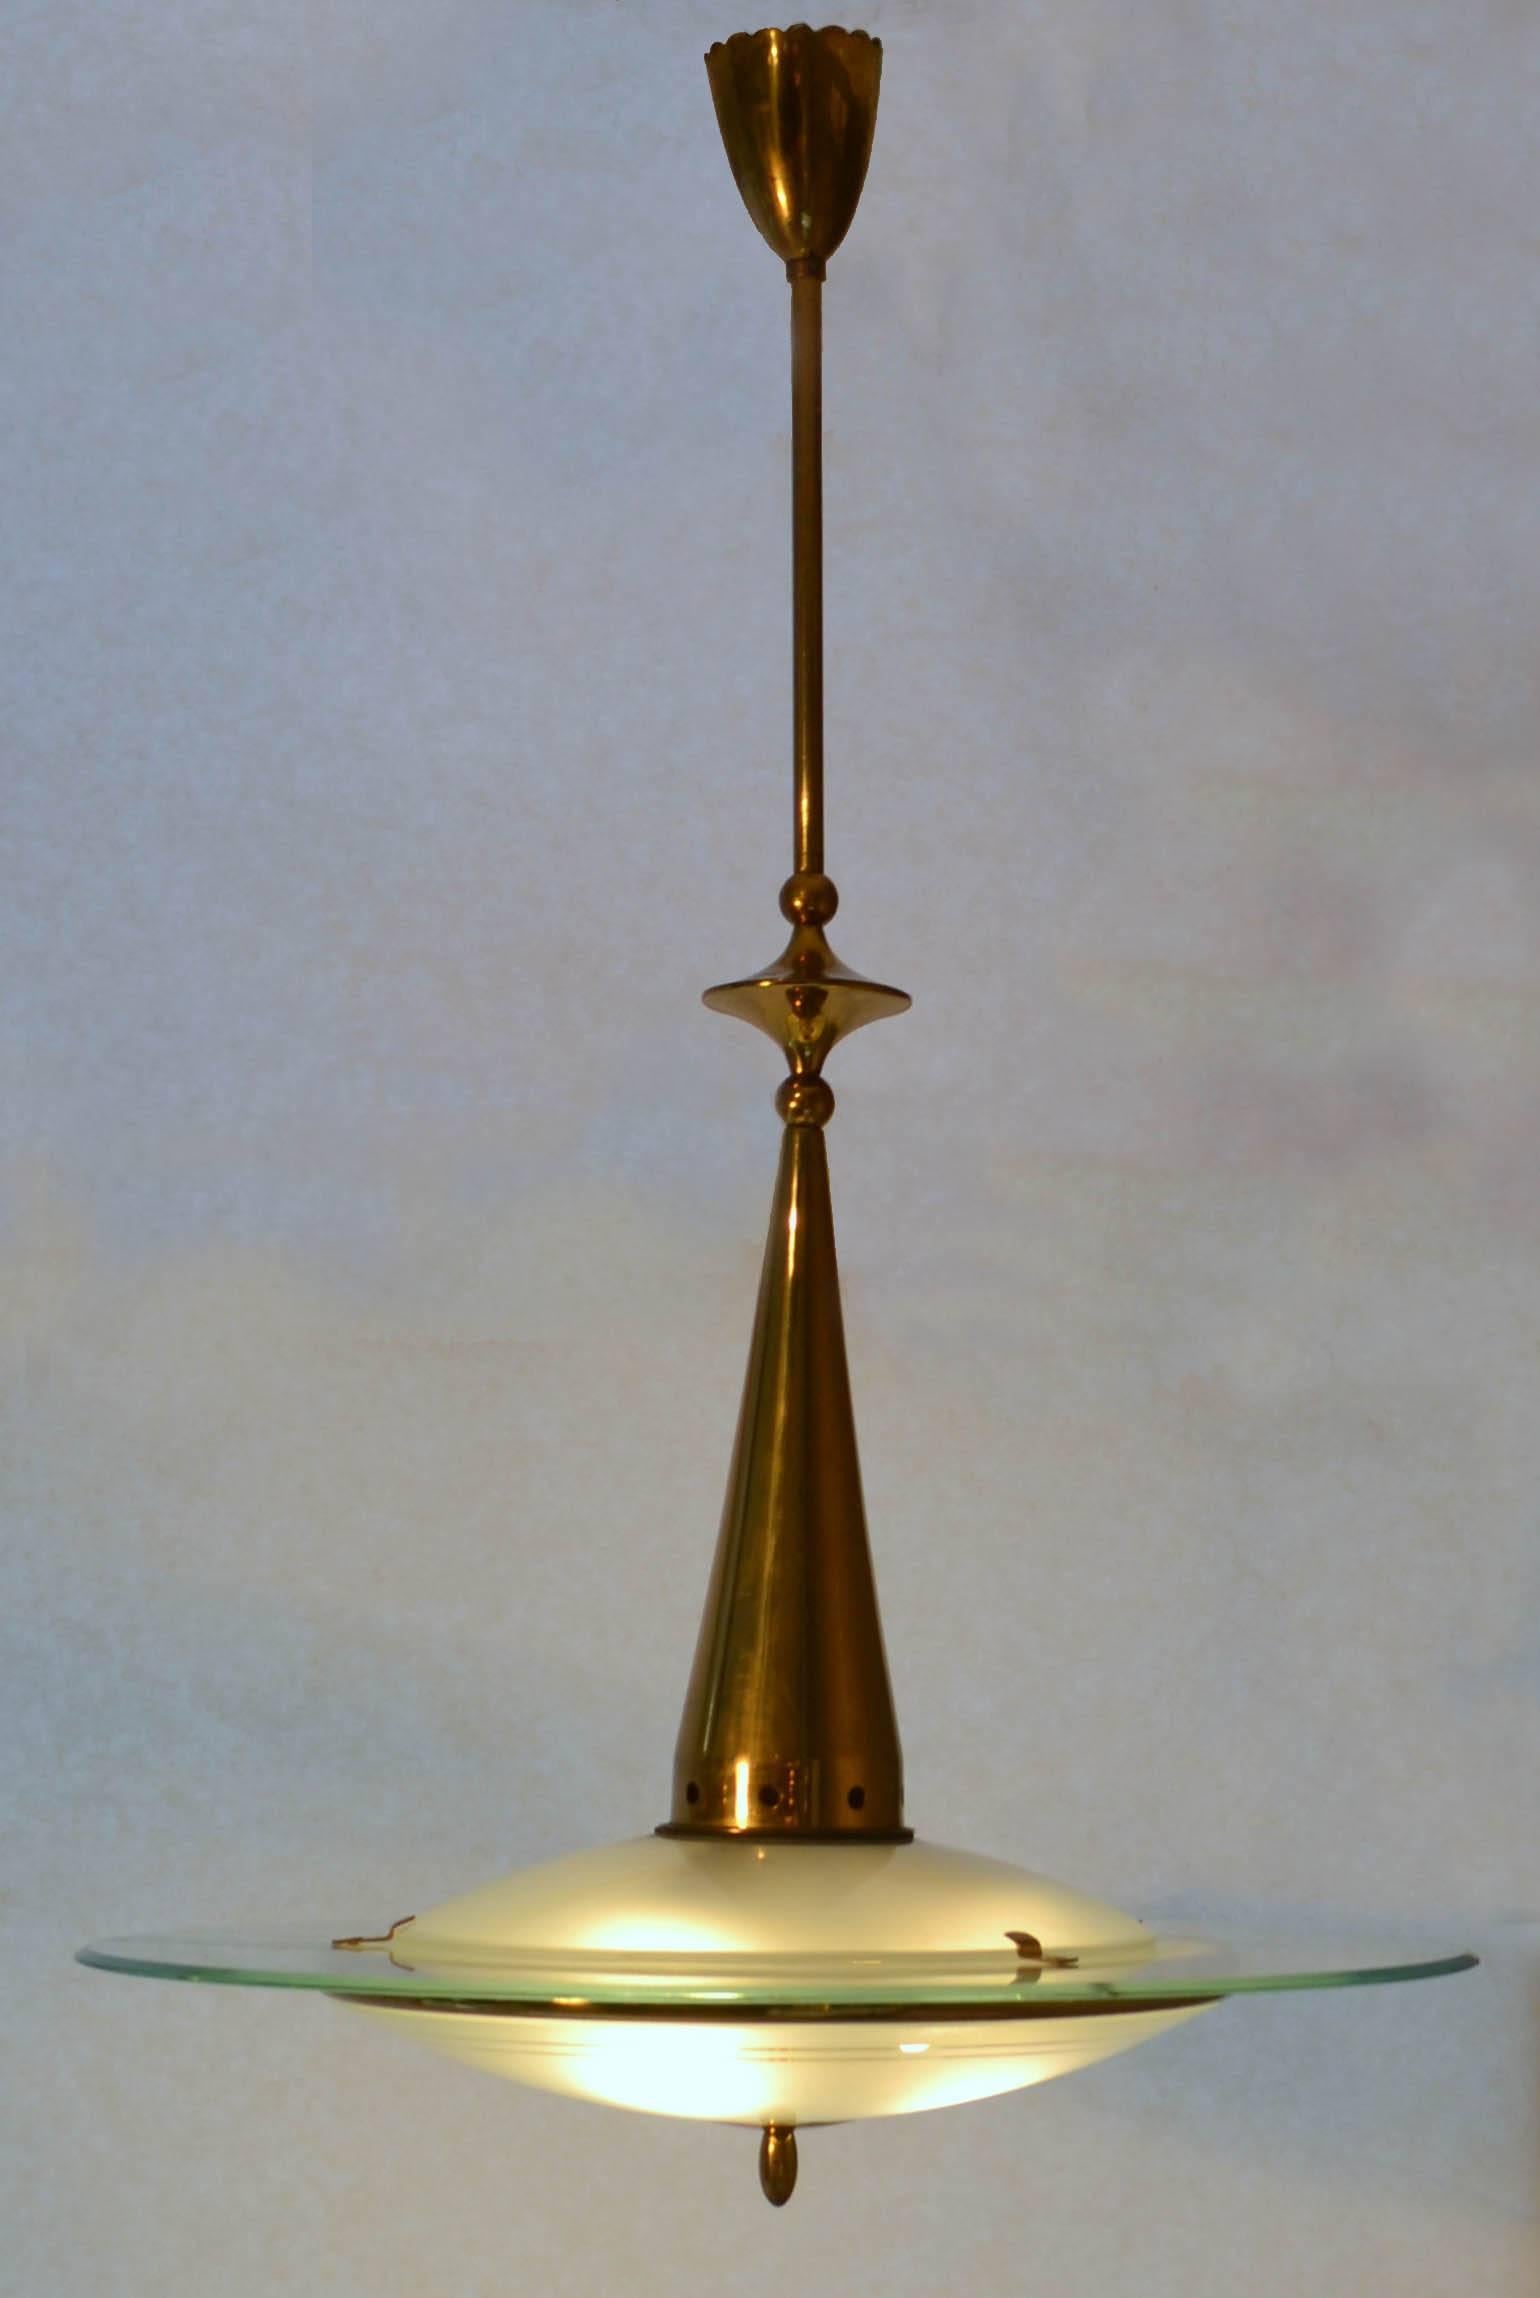 Sophisticated and refined Italian pendant light made of three-pieces of blown and etched glass hold together by brass elements is attributed to Pietro Chiesa, Fontana Arte, Italy, circa 1946-1948
The light is in excellent condition rewired for